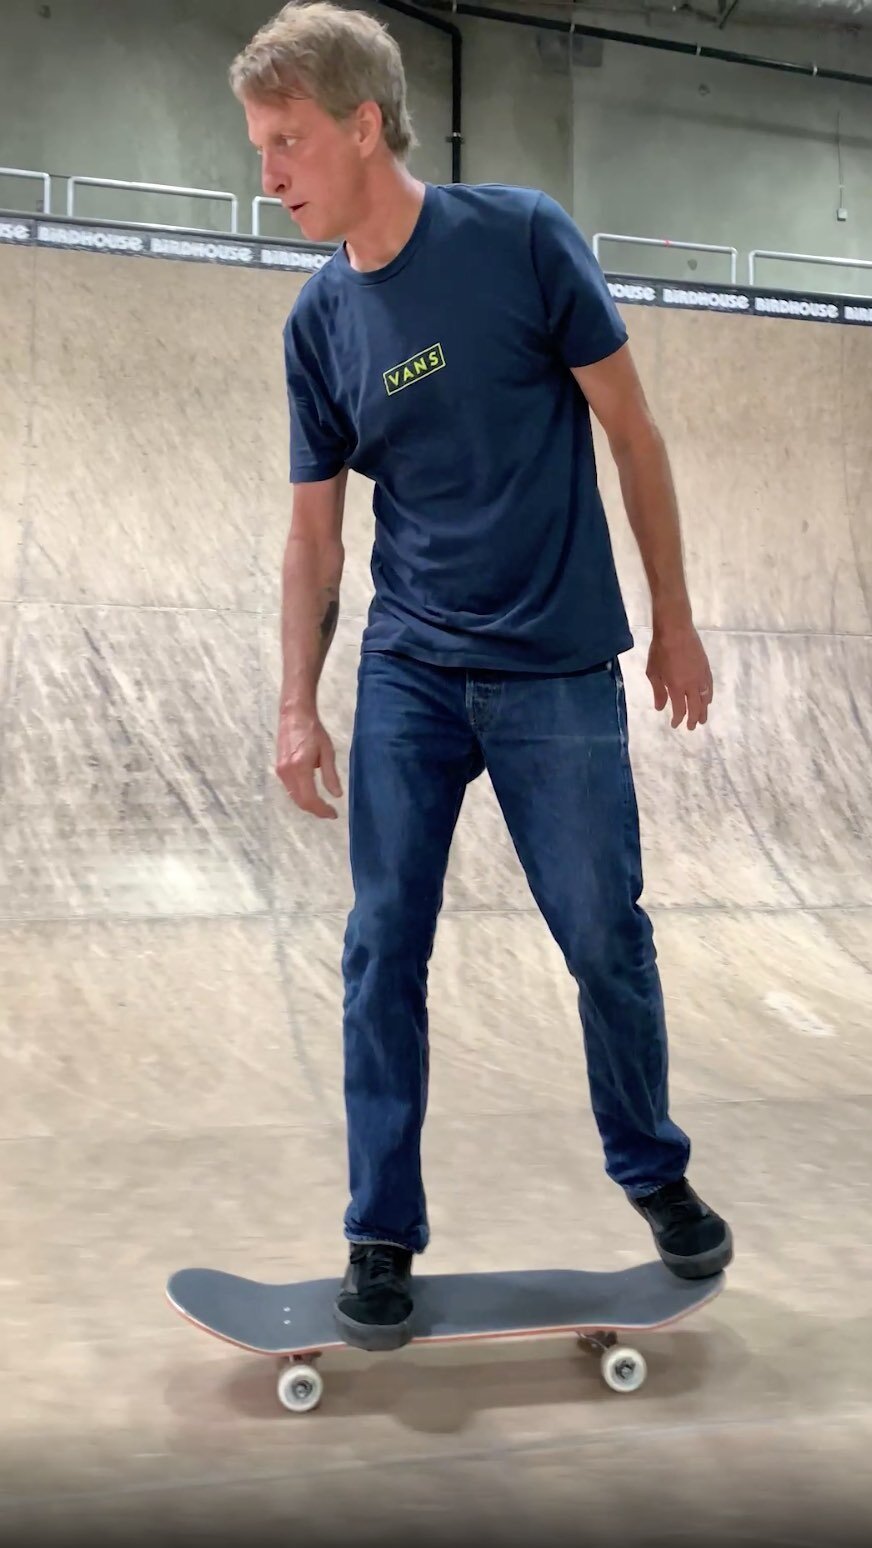 How To Do A Frontside Heelflip With Tony Hawk